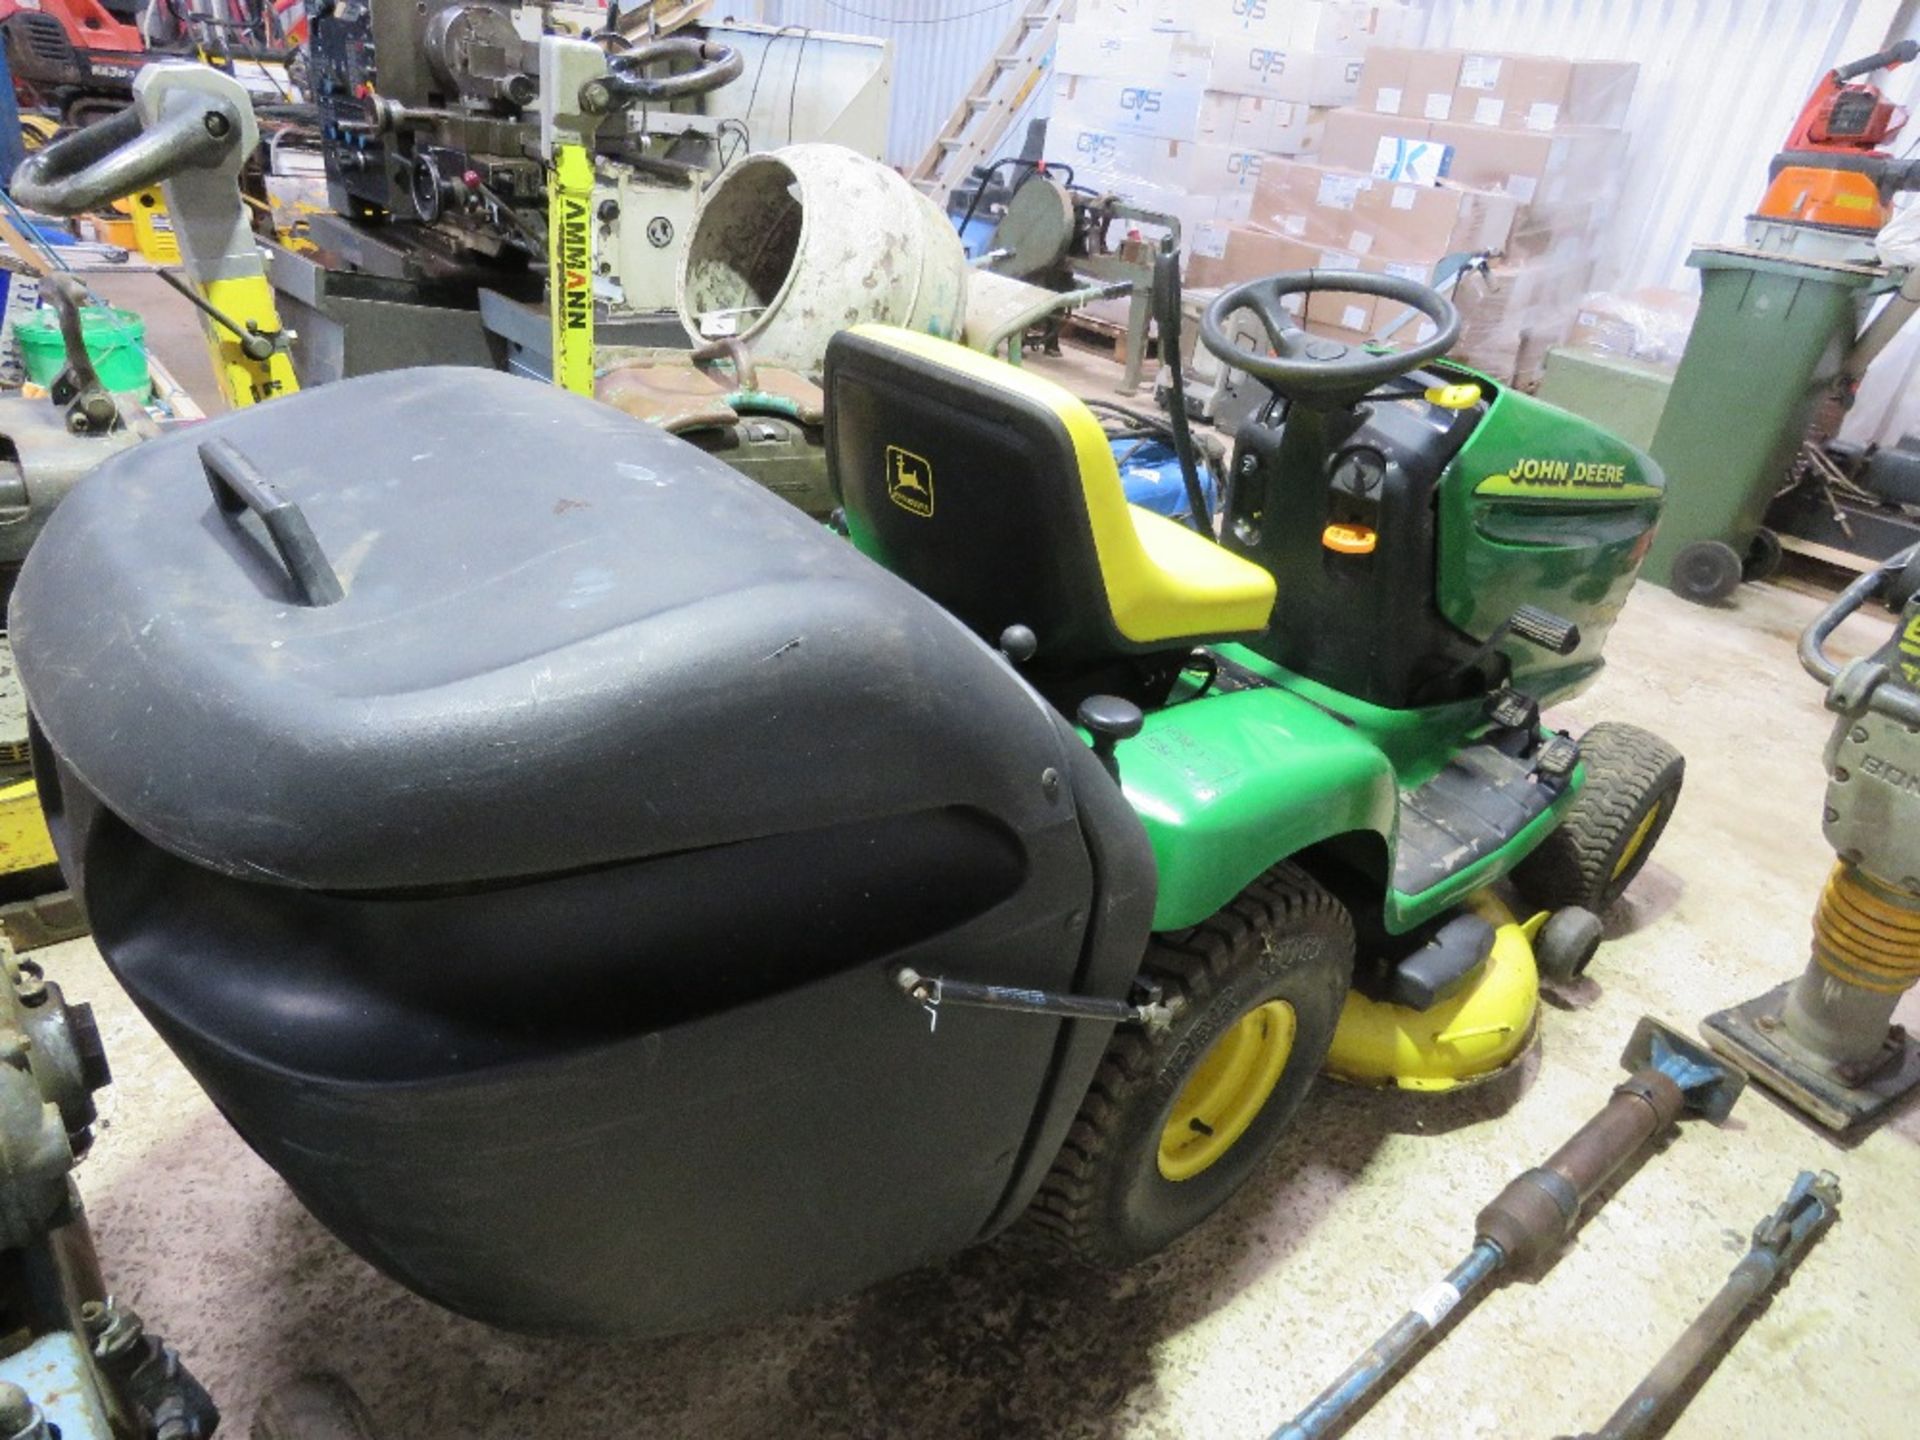 JOHN DEERE LTR166 RIDE ON MOWER. WHEN TESTED WAS SEEN TO RUN AND DRIVE BUT MOWER NOT ENGAGING (NO BE - Image 3 of 8